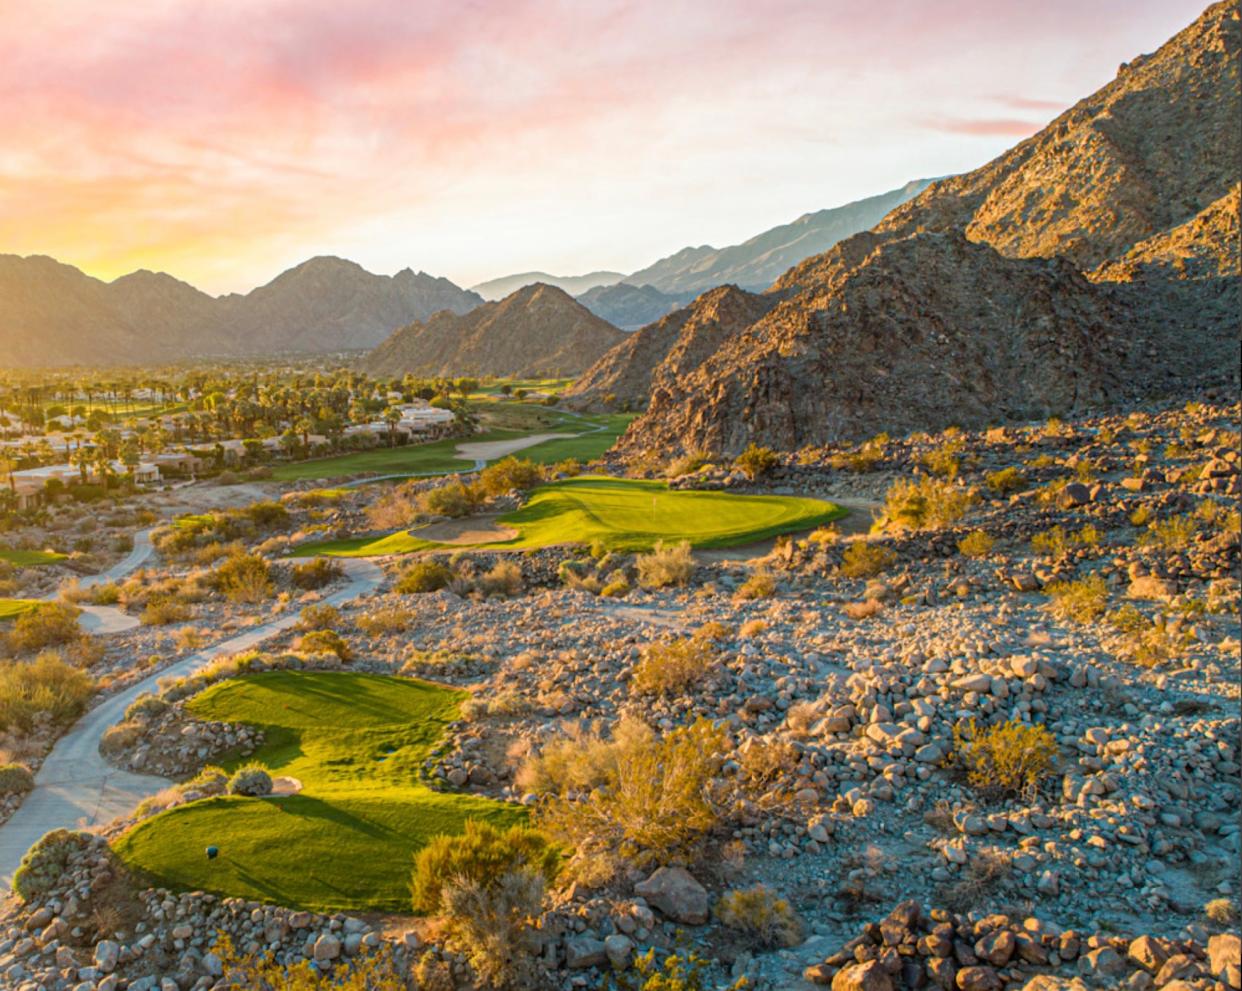 Dean Mayo, a longtime PGA golf instructor, launched his photography business nearly 15 years ago out of a devotion to maintain his PGA status. Initially his subject matter revolved around Palm Springs golf courses.